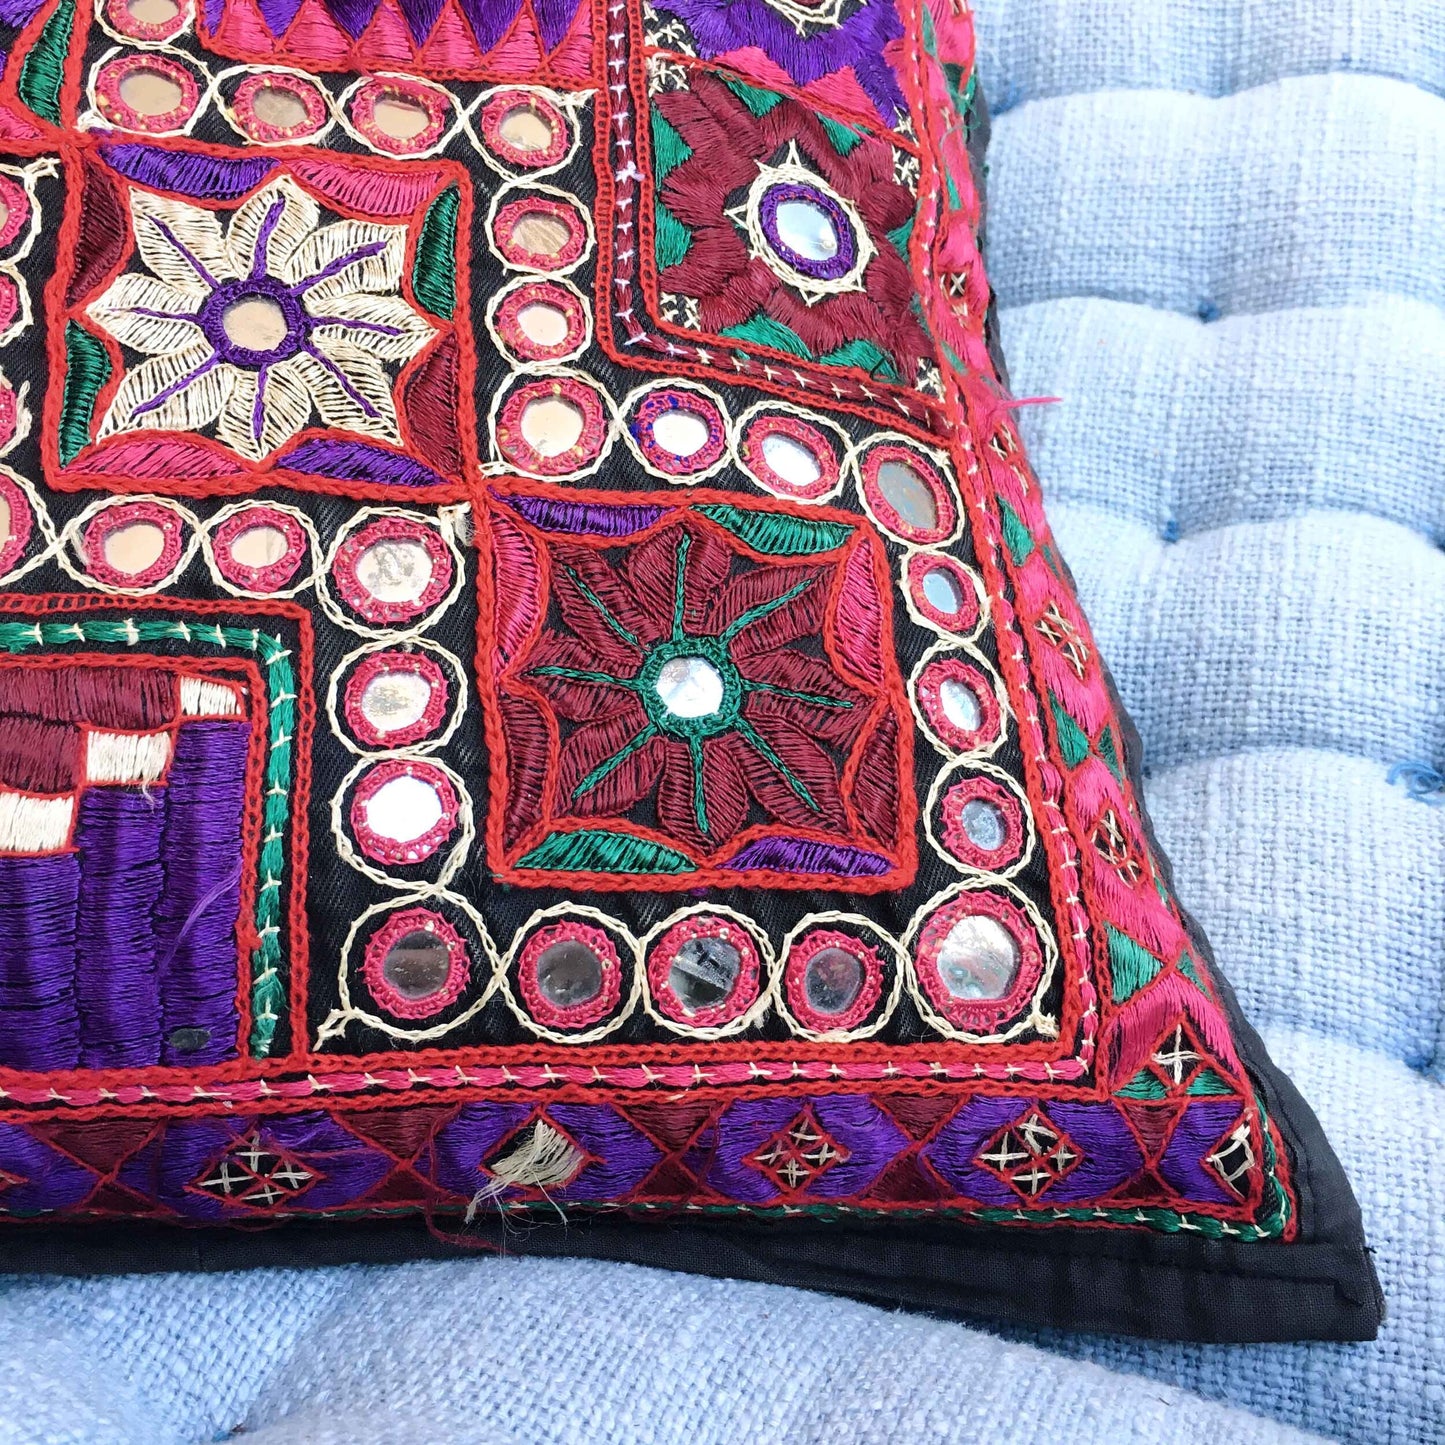 Vintage Indian hand-embroidered mirror boho pillow cases - set of 2